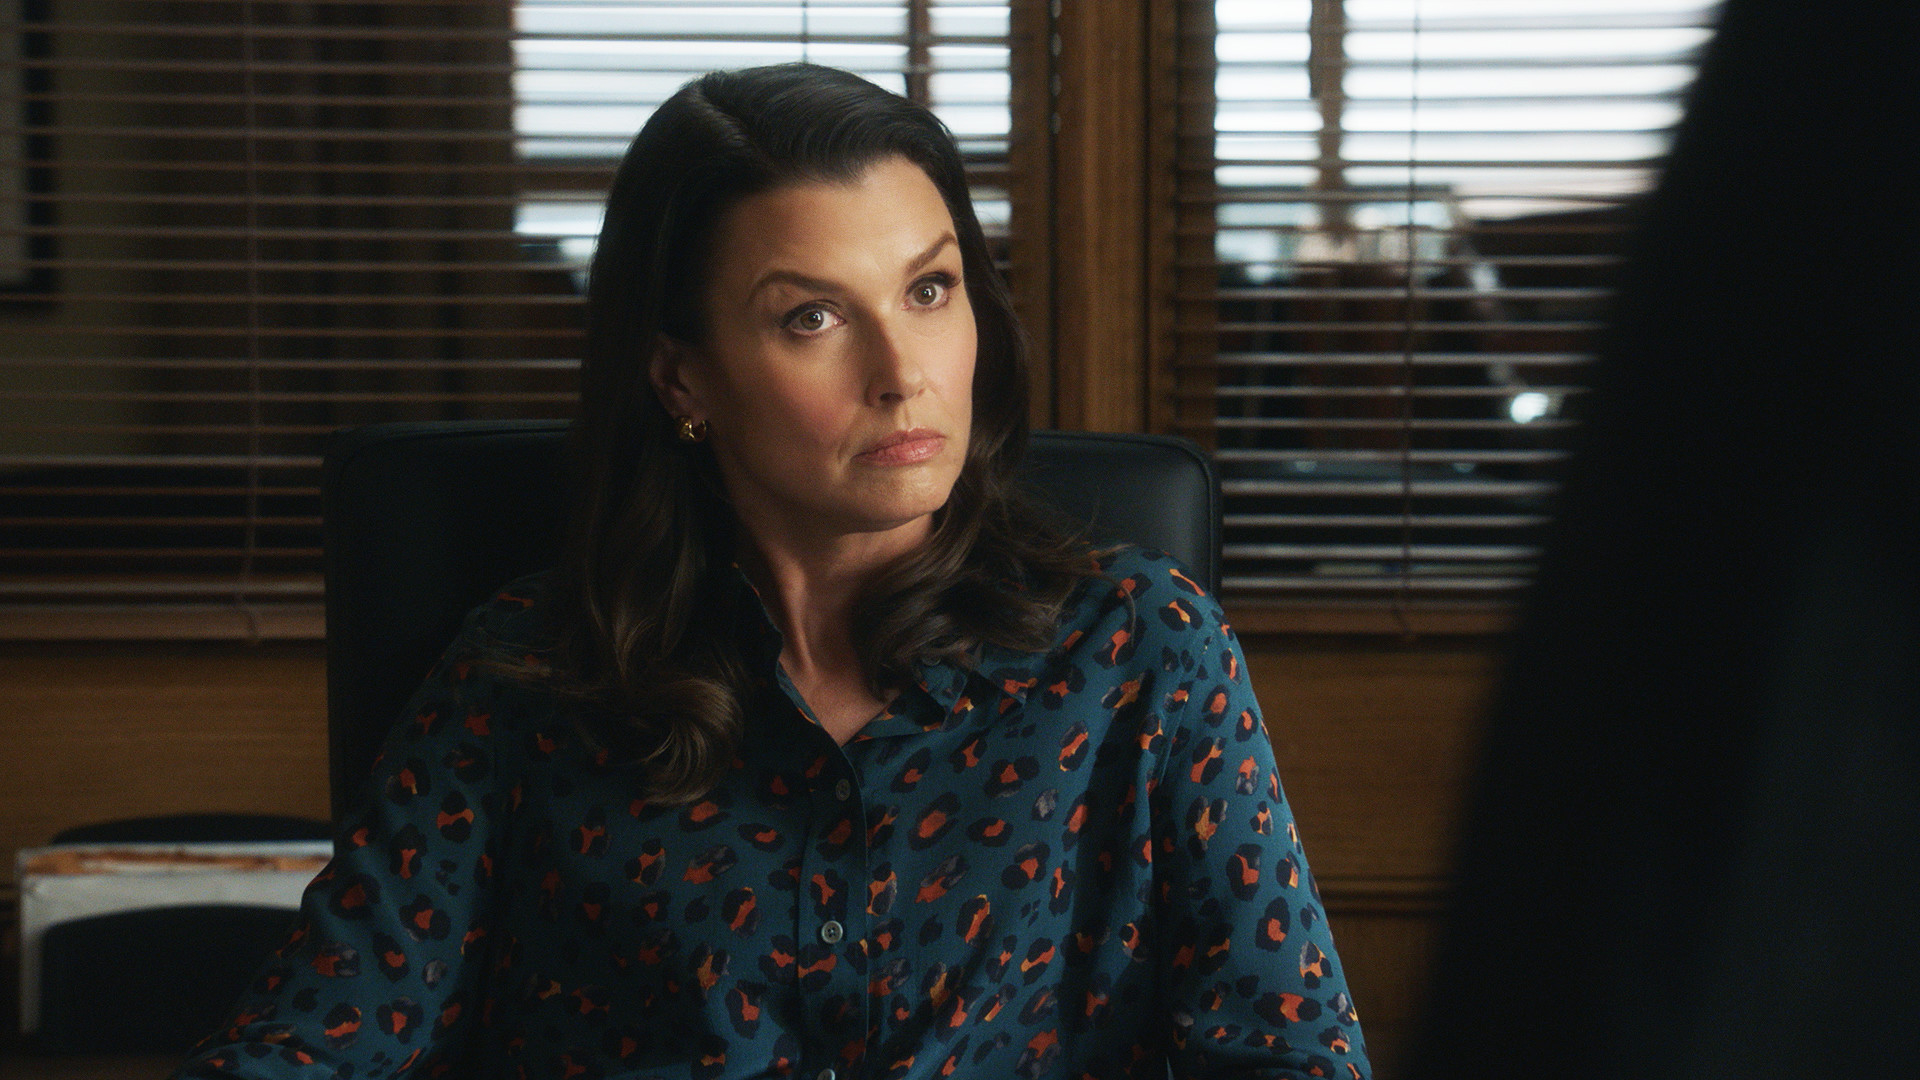 Bridget Moynahan as Erin Reagan in the "Irish Exits" episode of "Blue Bloods" in April 2022. | Source: Getty Images